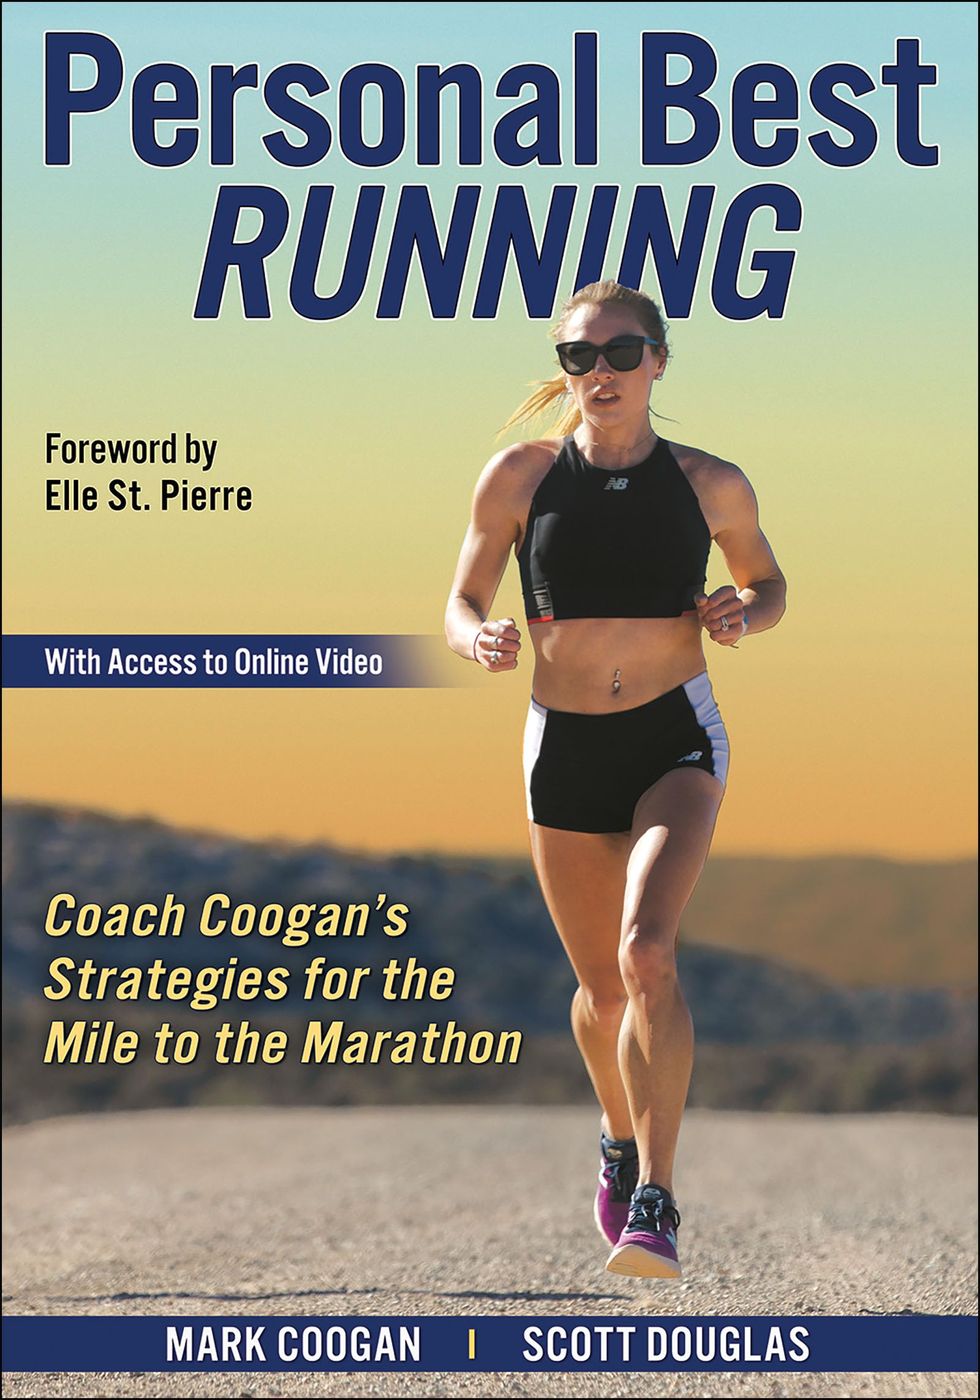 'Personal Best Running: Coach Coogan’s Strategies for the Mile to the Marathon' by Mark Coogan and Scott Douglas